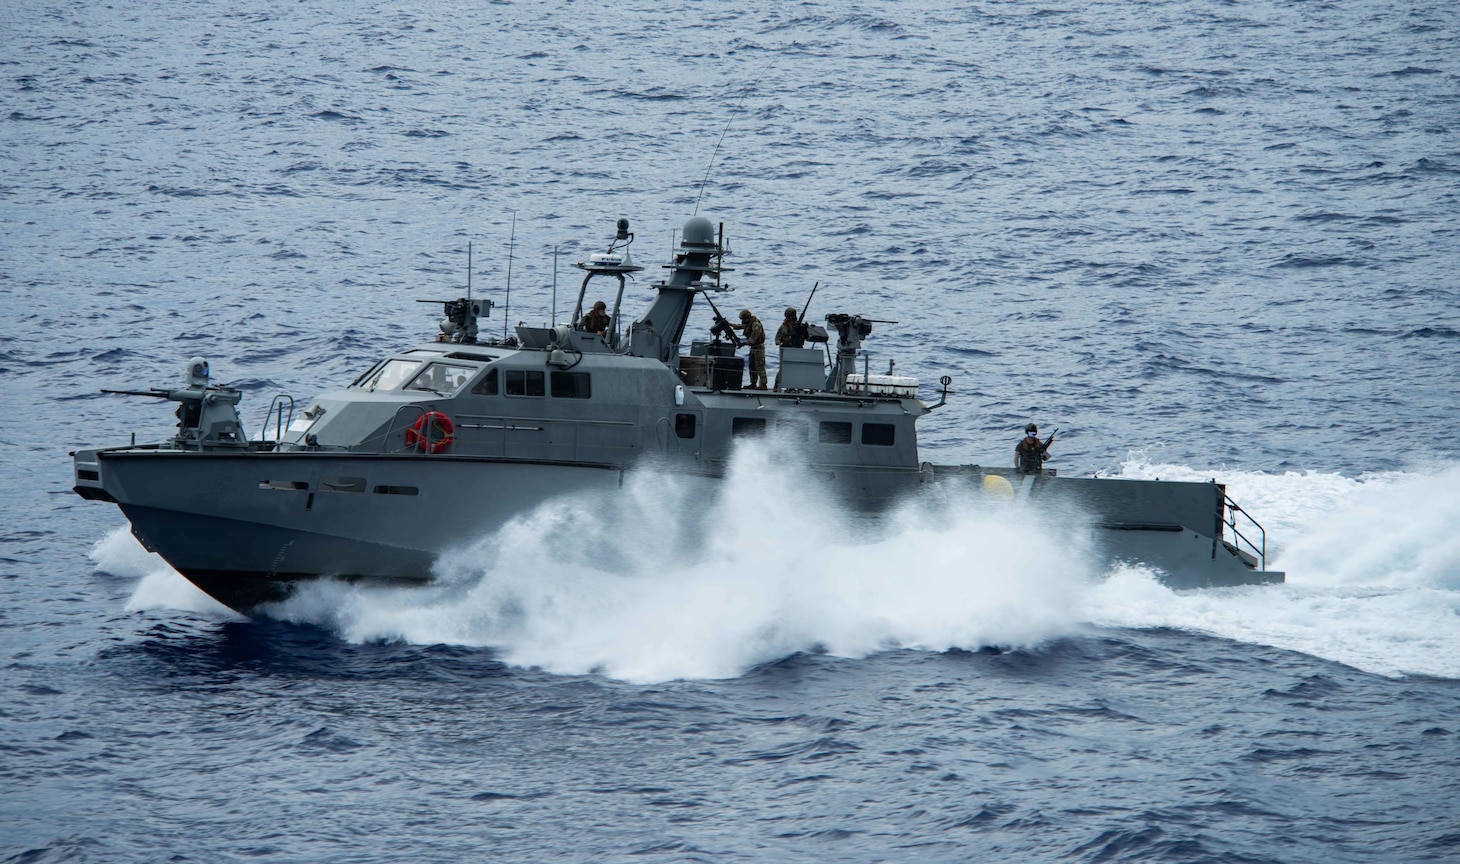 A Mark VI patrol boat participates in a security drill during Exercise Valiant Shield 2020.